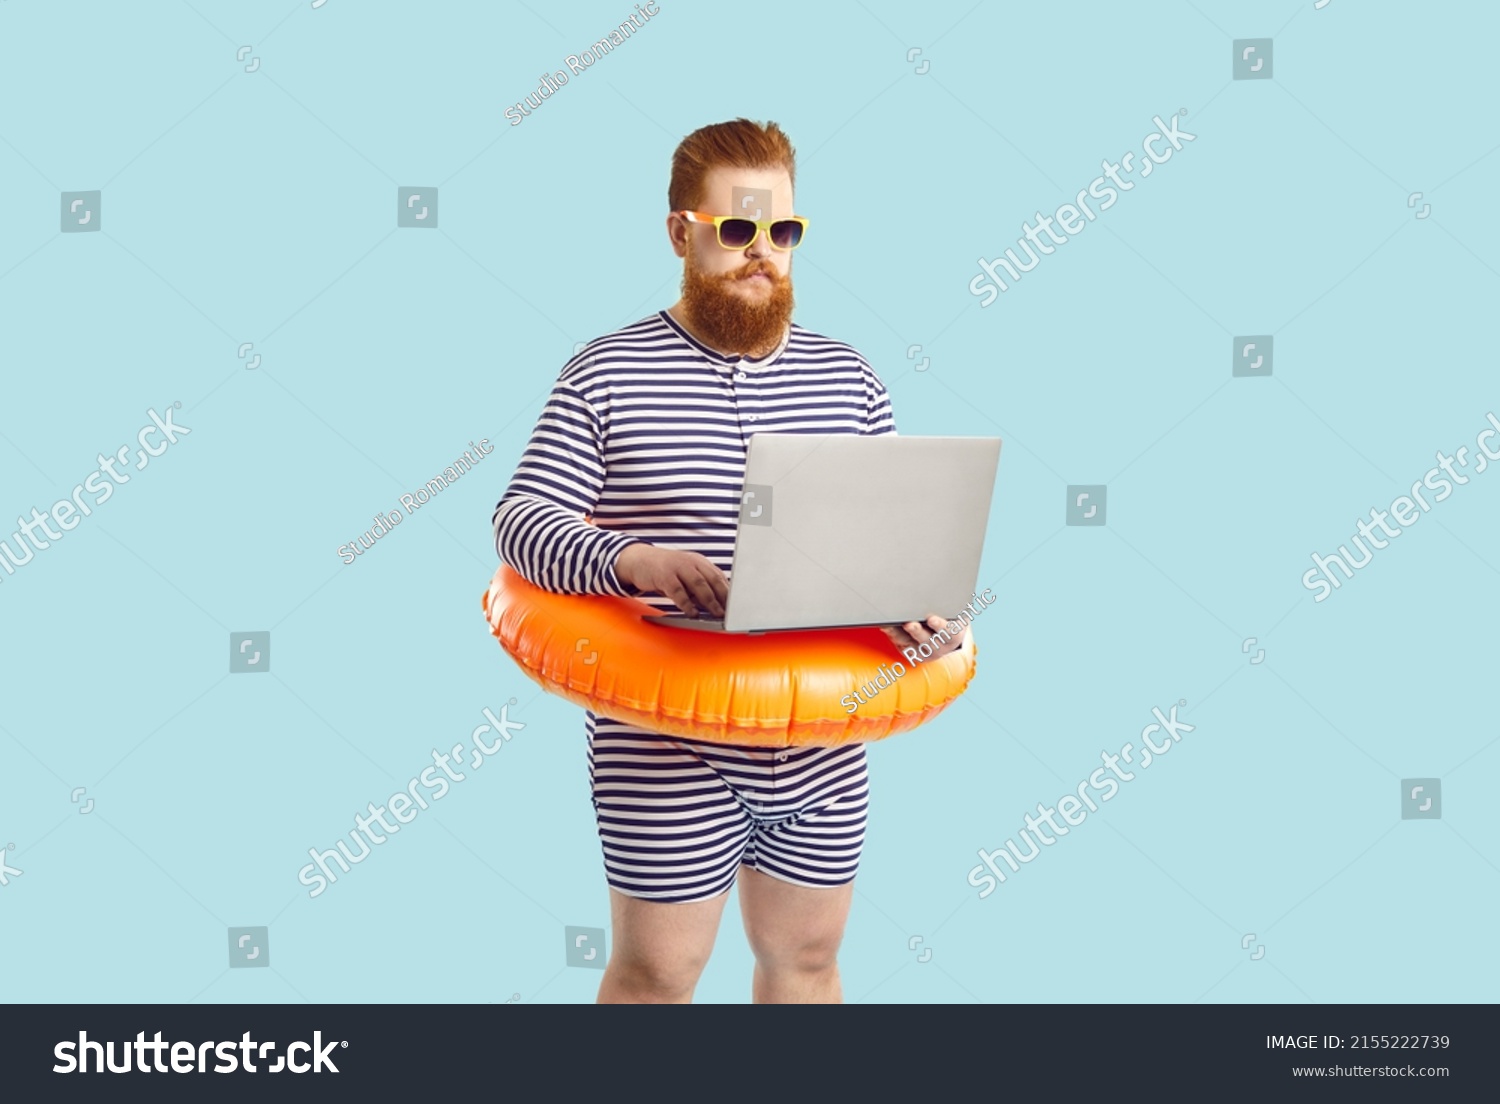 Funny man finds time for business during summer holiday at seaside. Serious chubby entrepreneur working on computer while on vacation. Busy plus size guy in striped swimsuit using his laptop at beach #2155222739